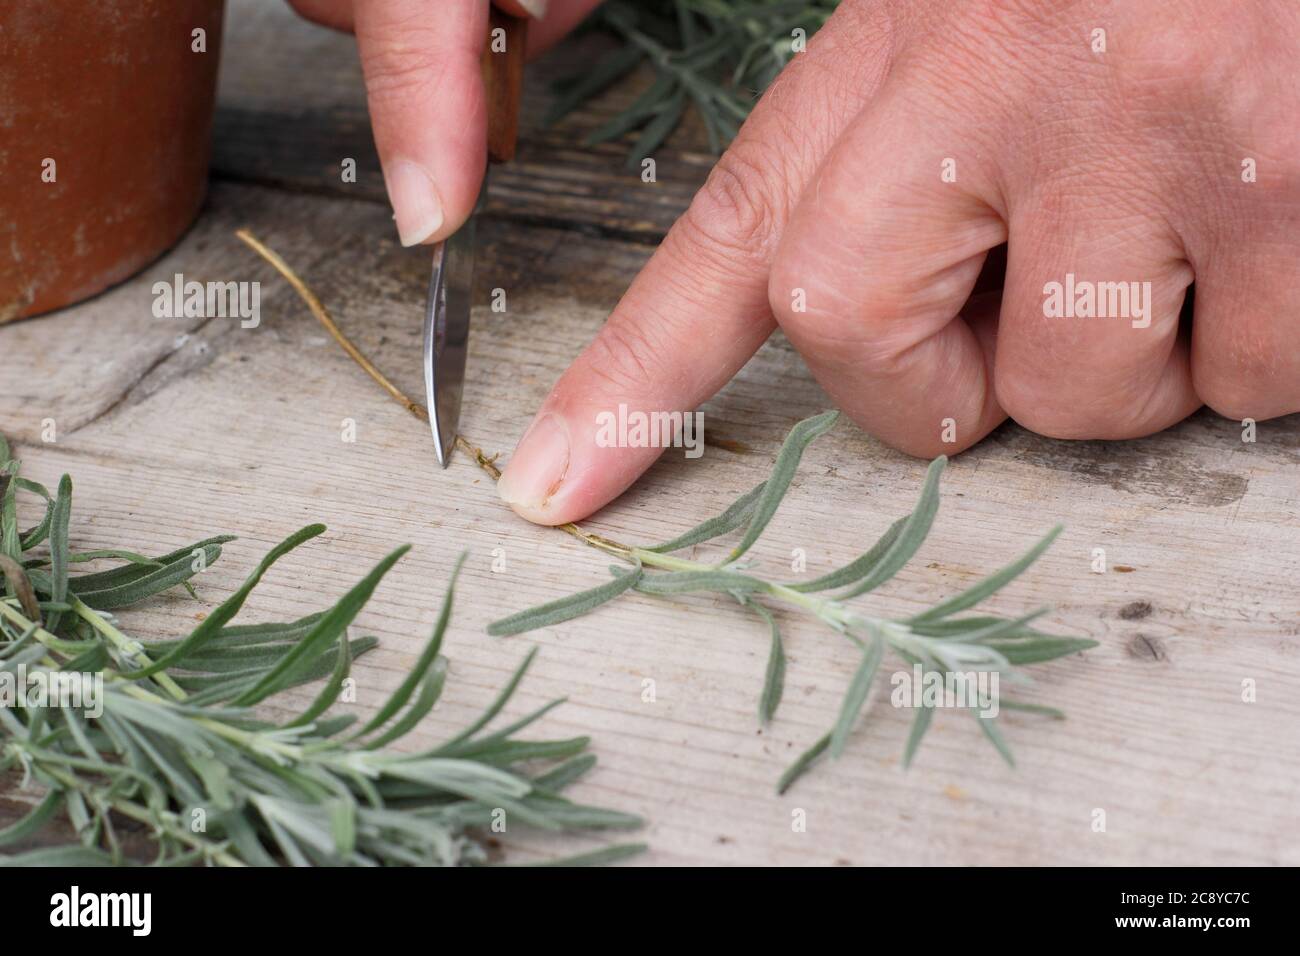 Plant cuttings from Lavandula angustifolia. Taking cuttings from lavender plants in summer. UK Stock Photo